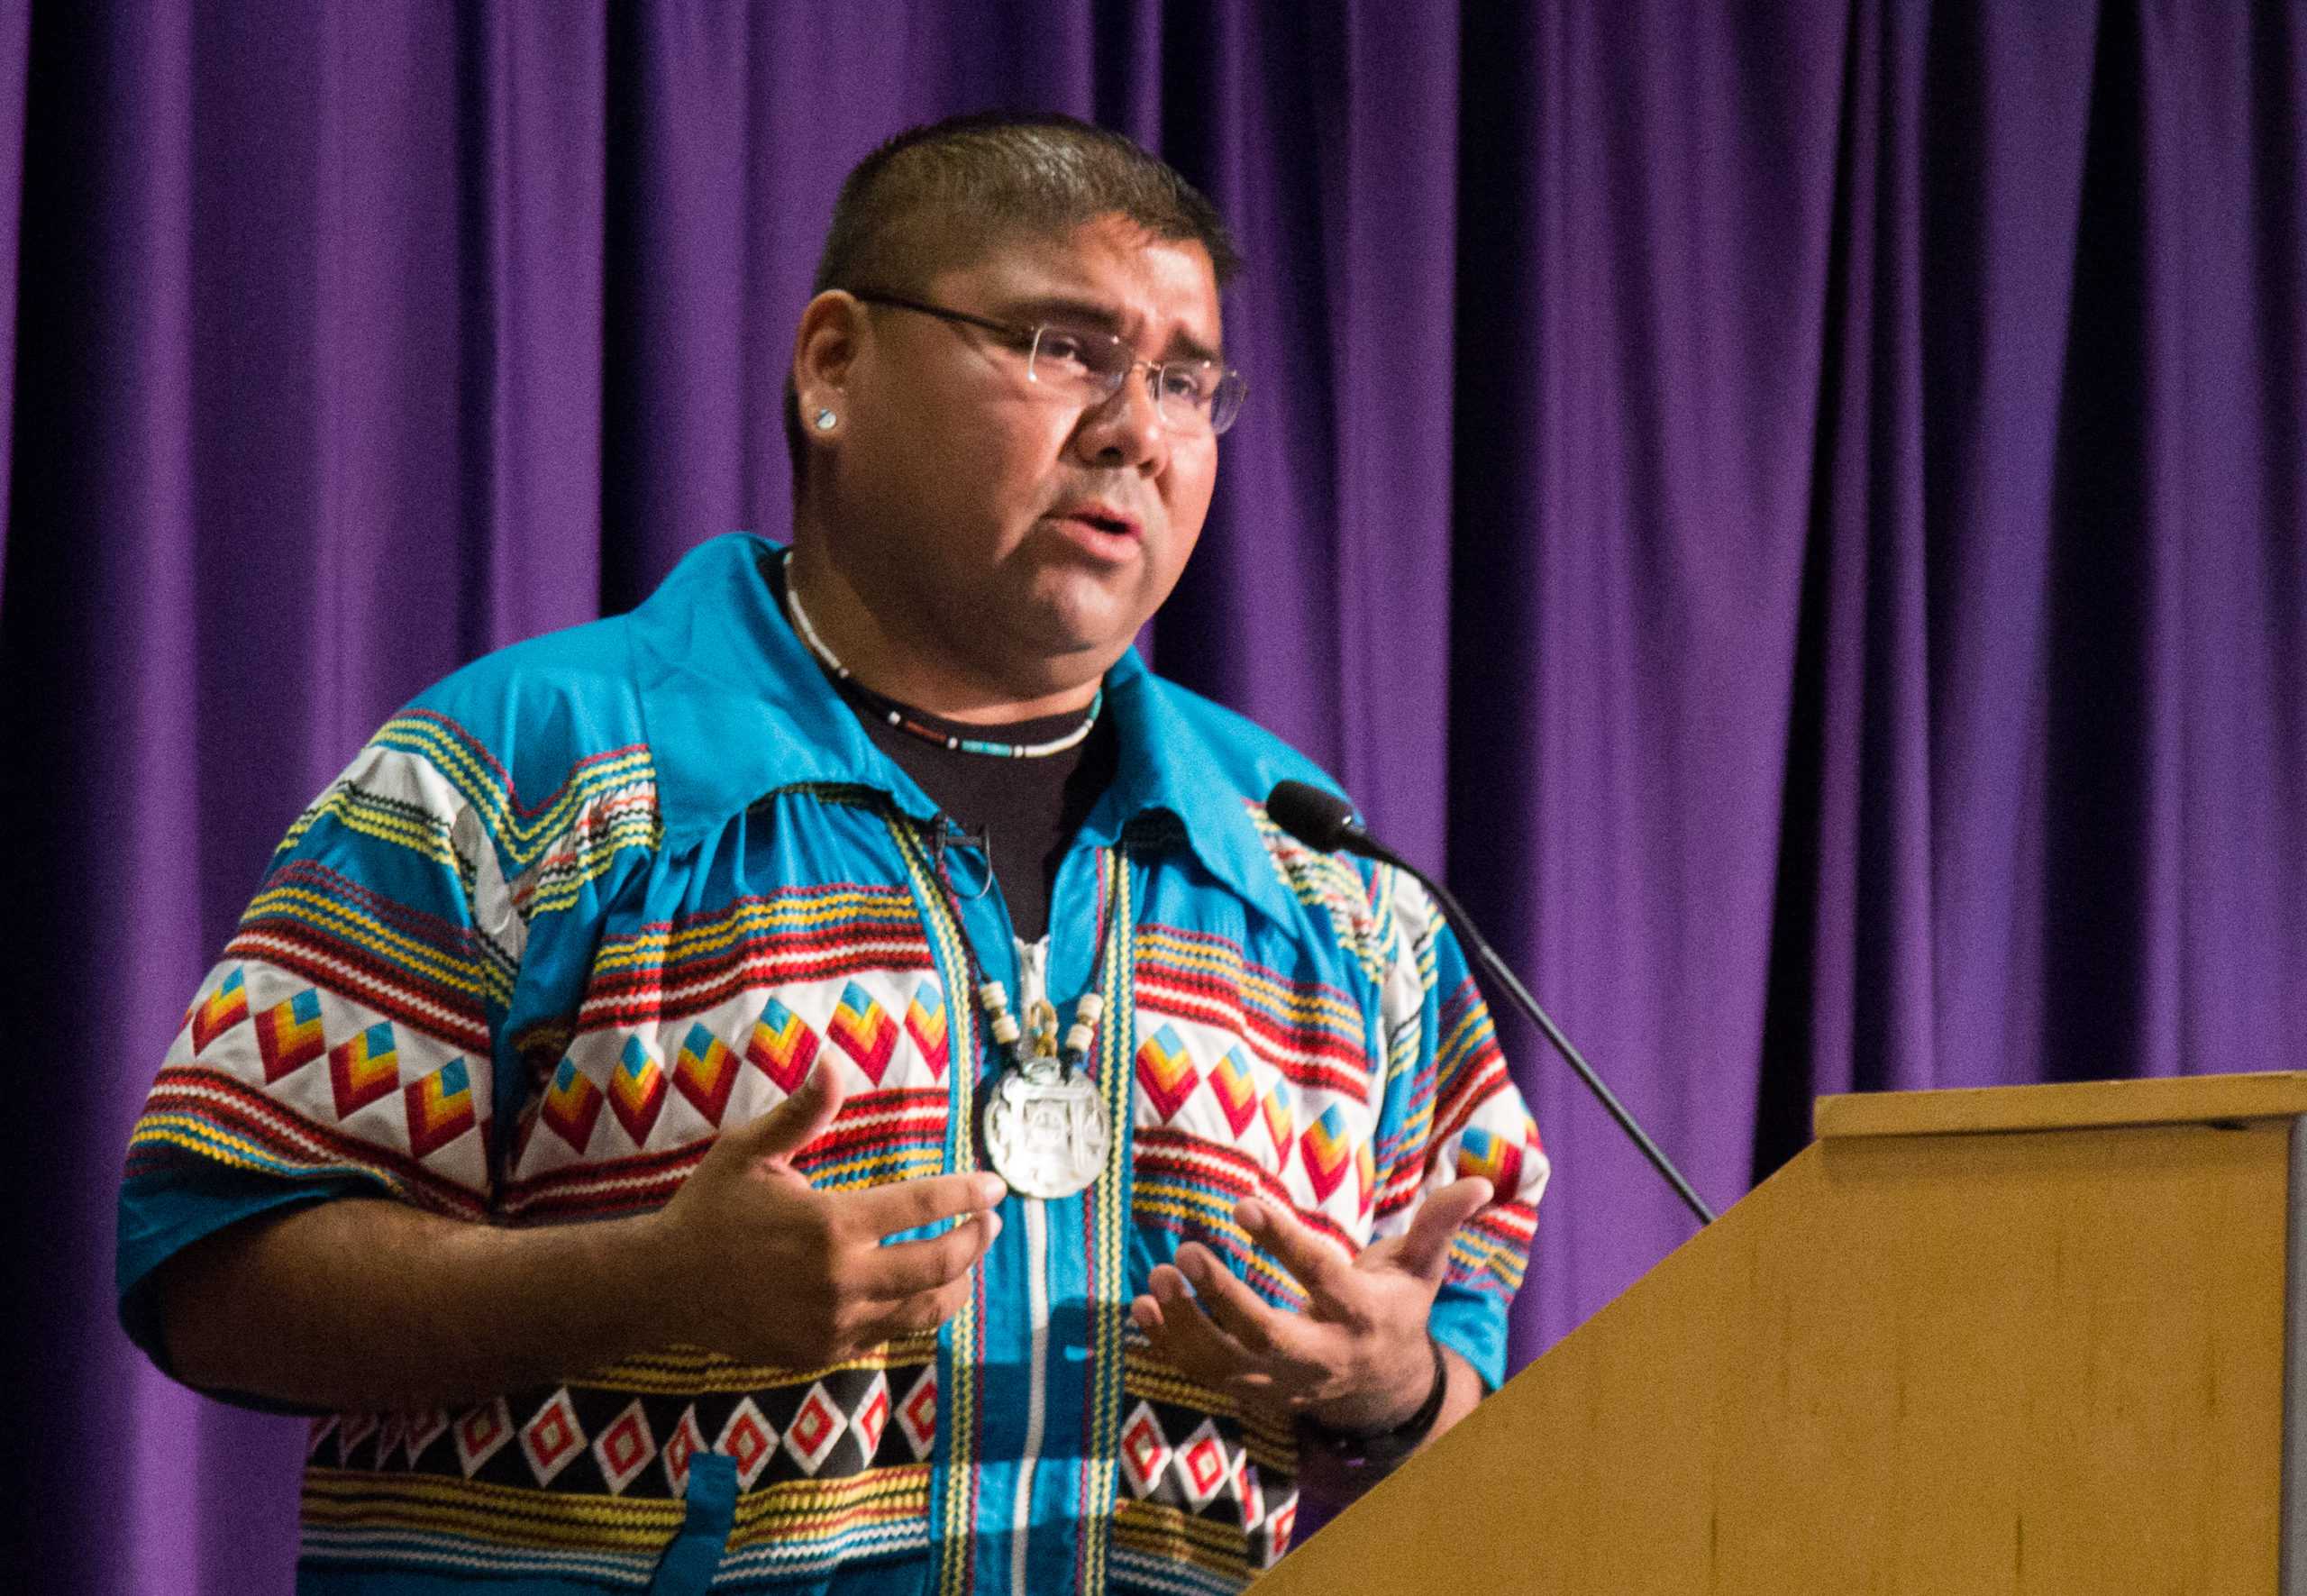 Chebon Kernell, a citizen of the Seminole Nation of Oklahoma, speaks at the panel discussion of the symposium. (Sam Bruton/TCU Staff Photographer)